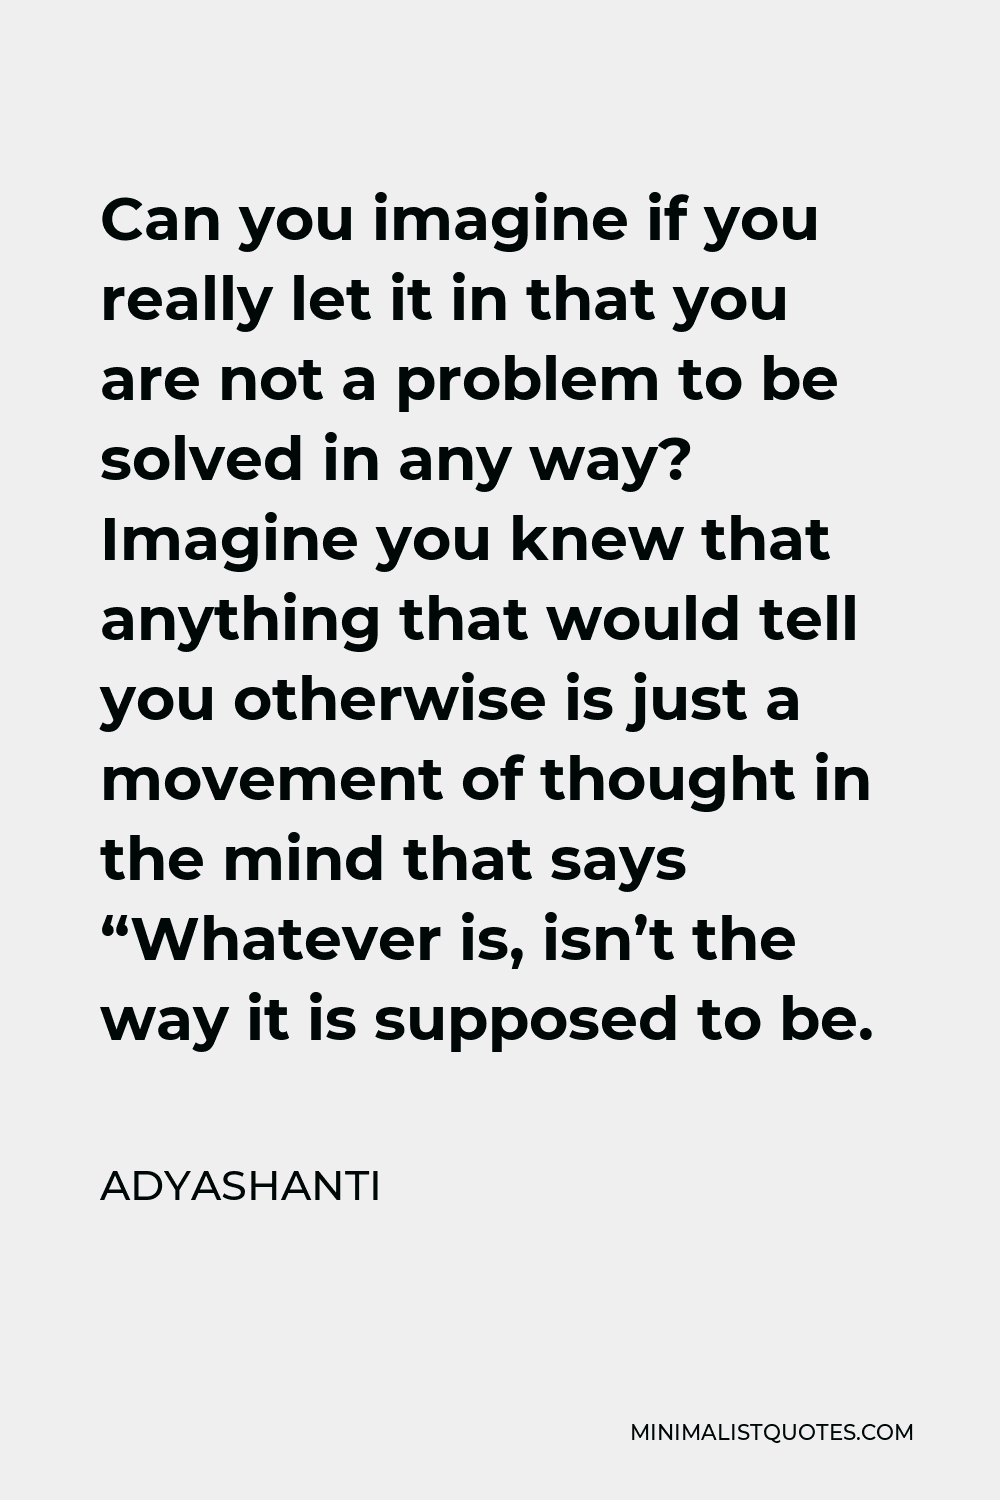 Adyashanti Quote - Can you imagine if you really let it in that you are not a problem to be solved in any way? Imagine you knew that anything that would tell you otherwise is just a movement of thought in the mind that says “Whatever is, isn’t the way it is supposed to be.